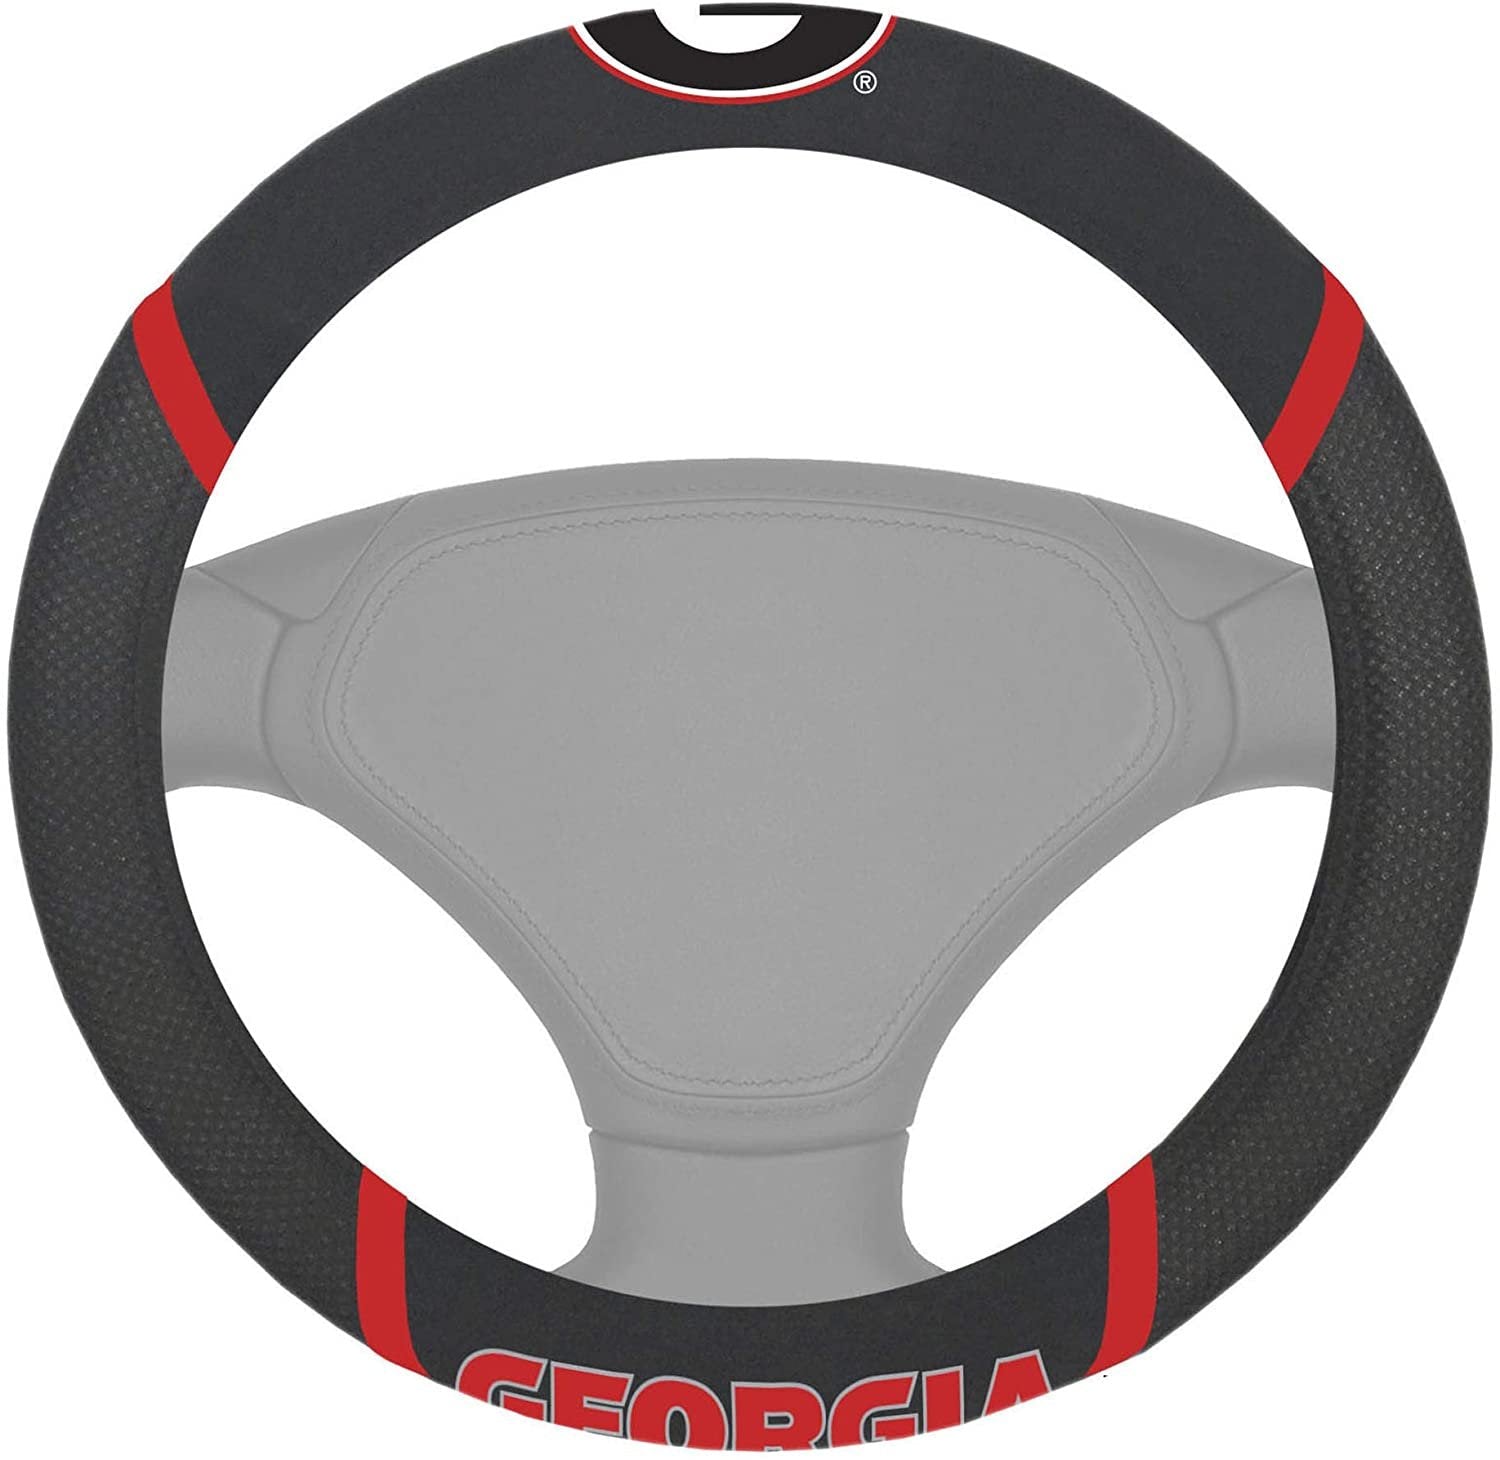 Georgia Bulldogs Steering Wheel Cover Embroidered Black 15 Inch University of